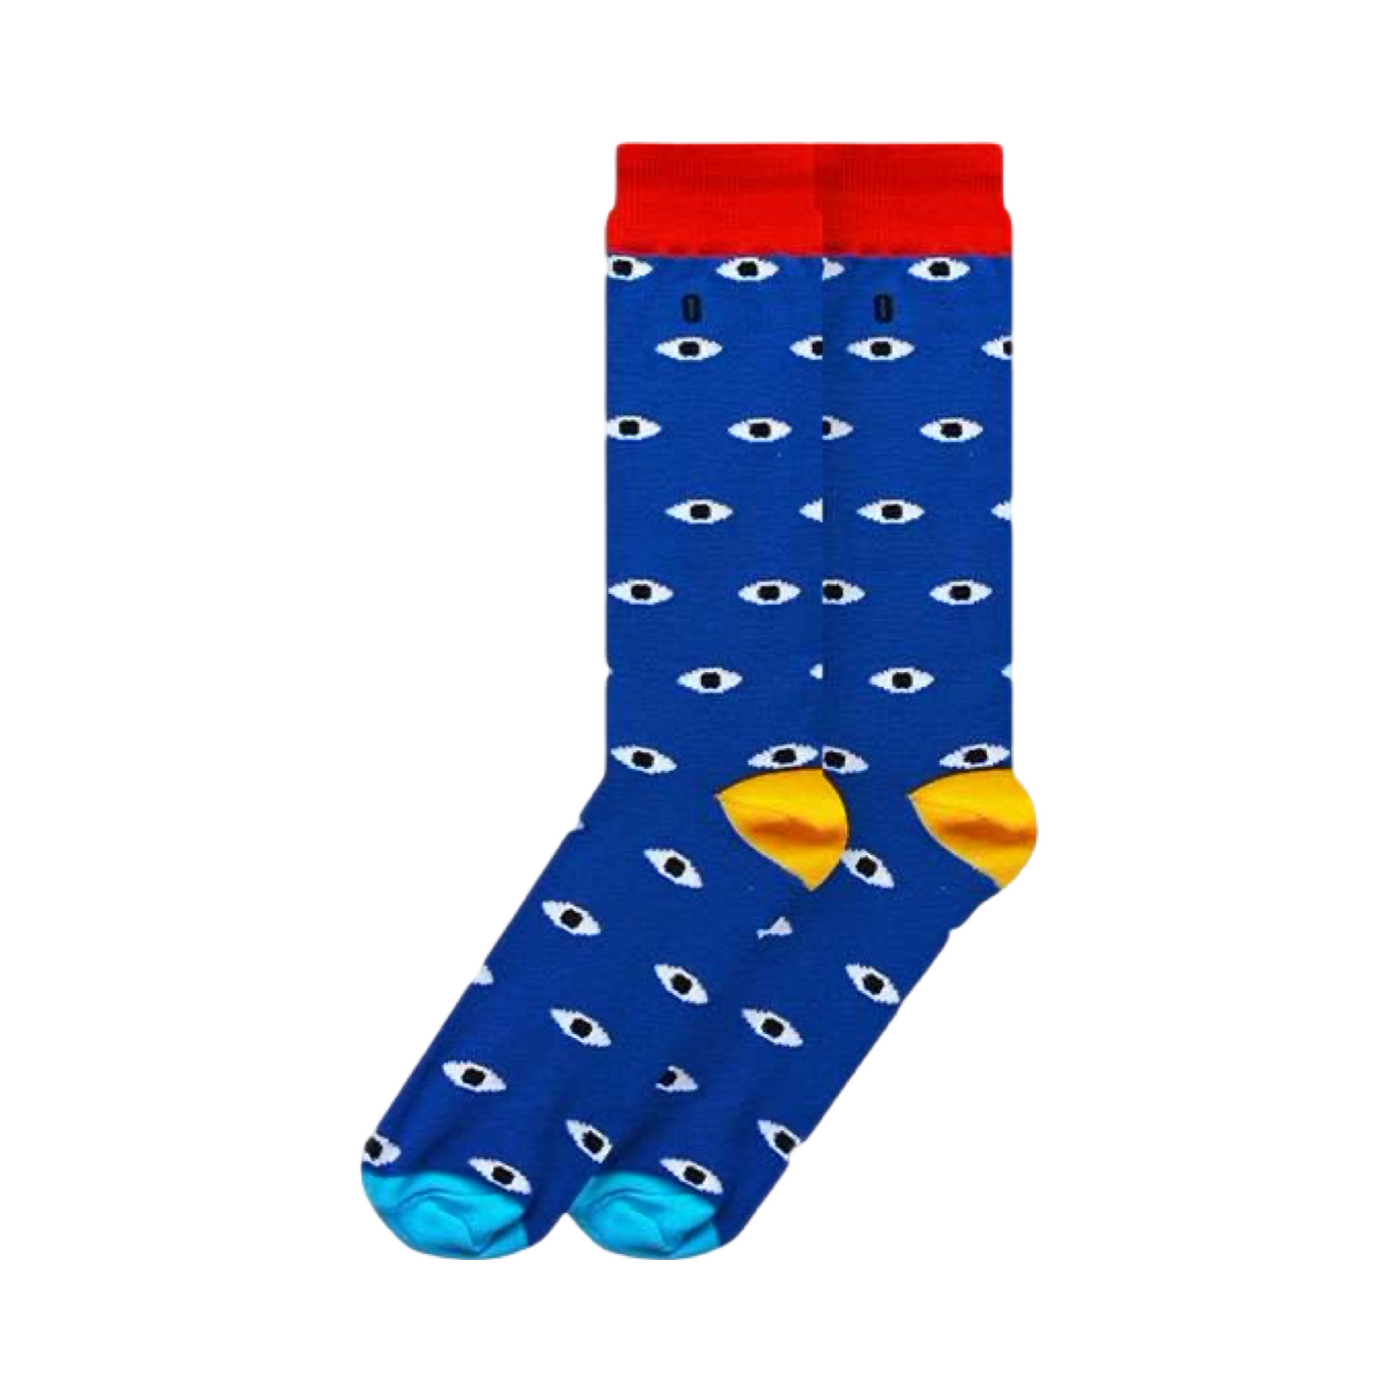 Pair of blue socks with images of eyes